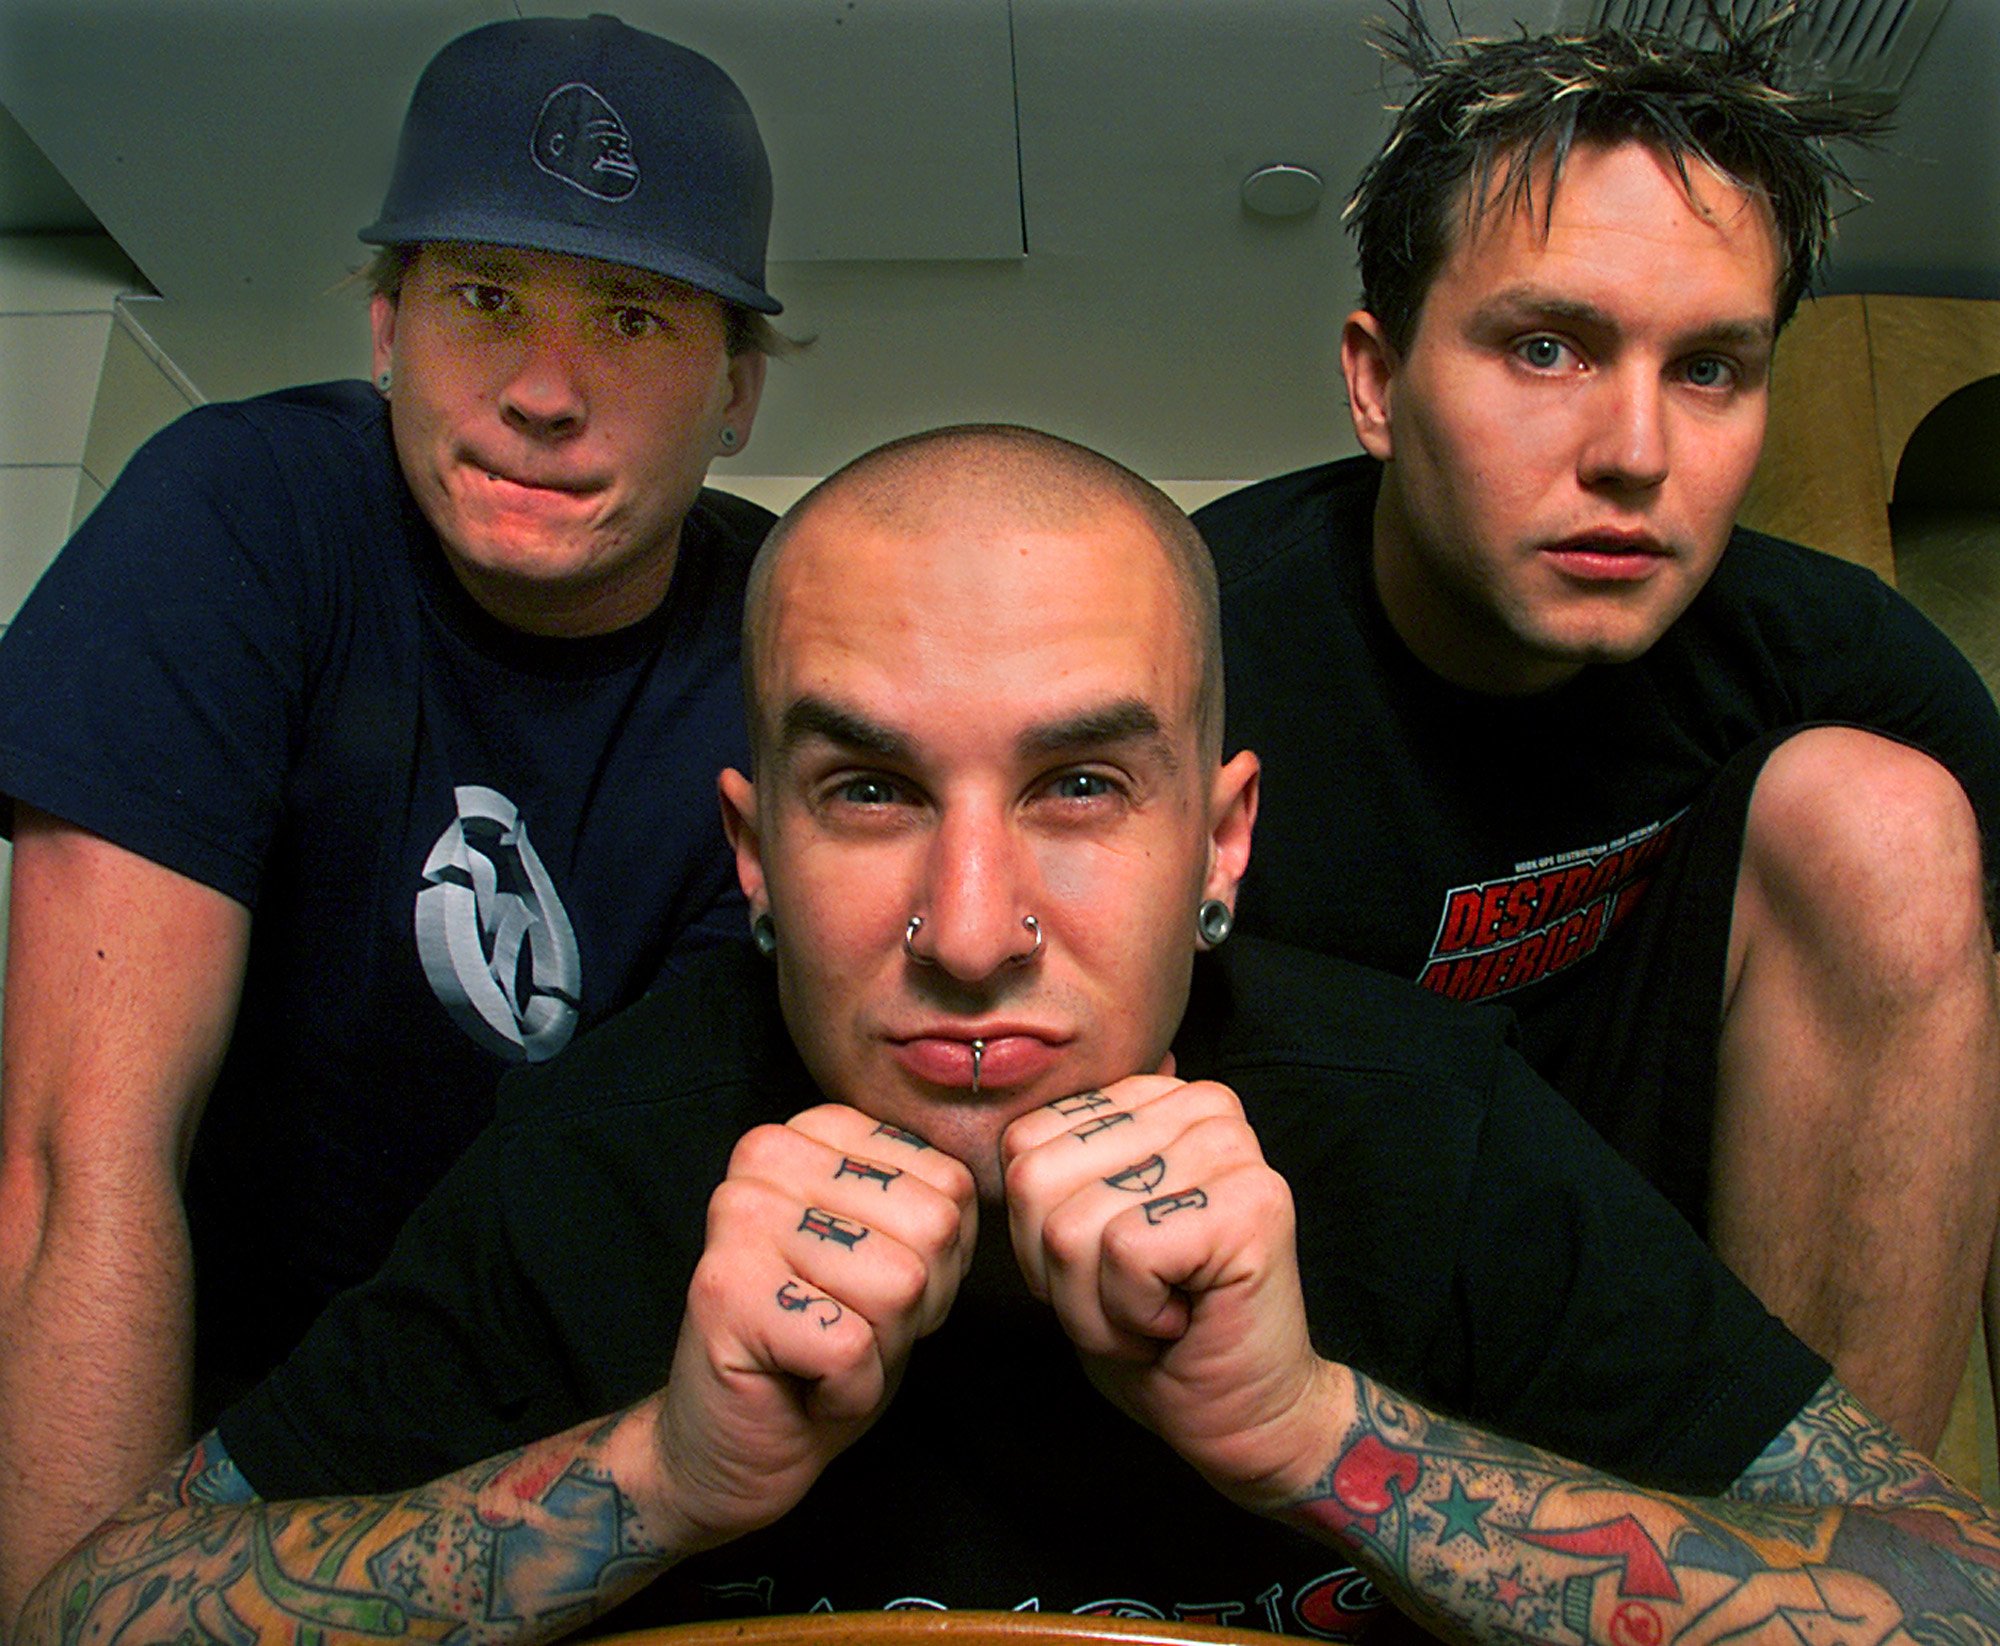 Blink-182 members Tom DeLonge, Travis Barker and Mark Hoppus pose before their performance at the Hollywood Paladium in 2001. | Source: Getty Images